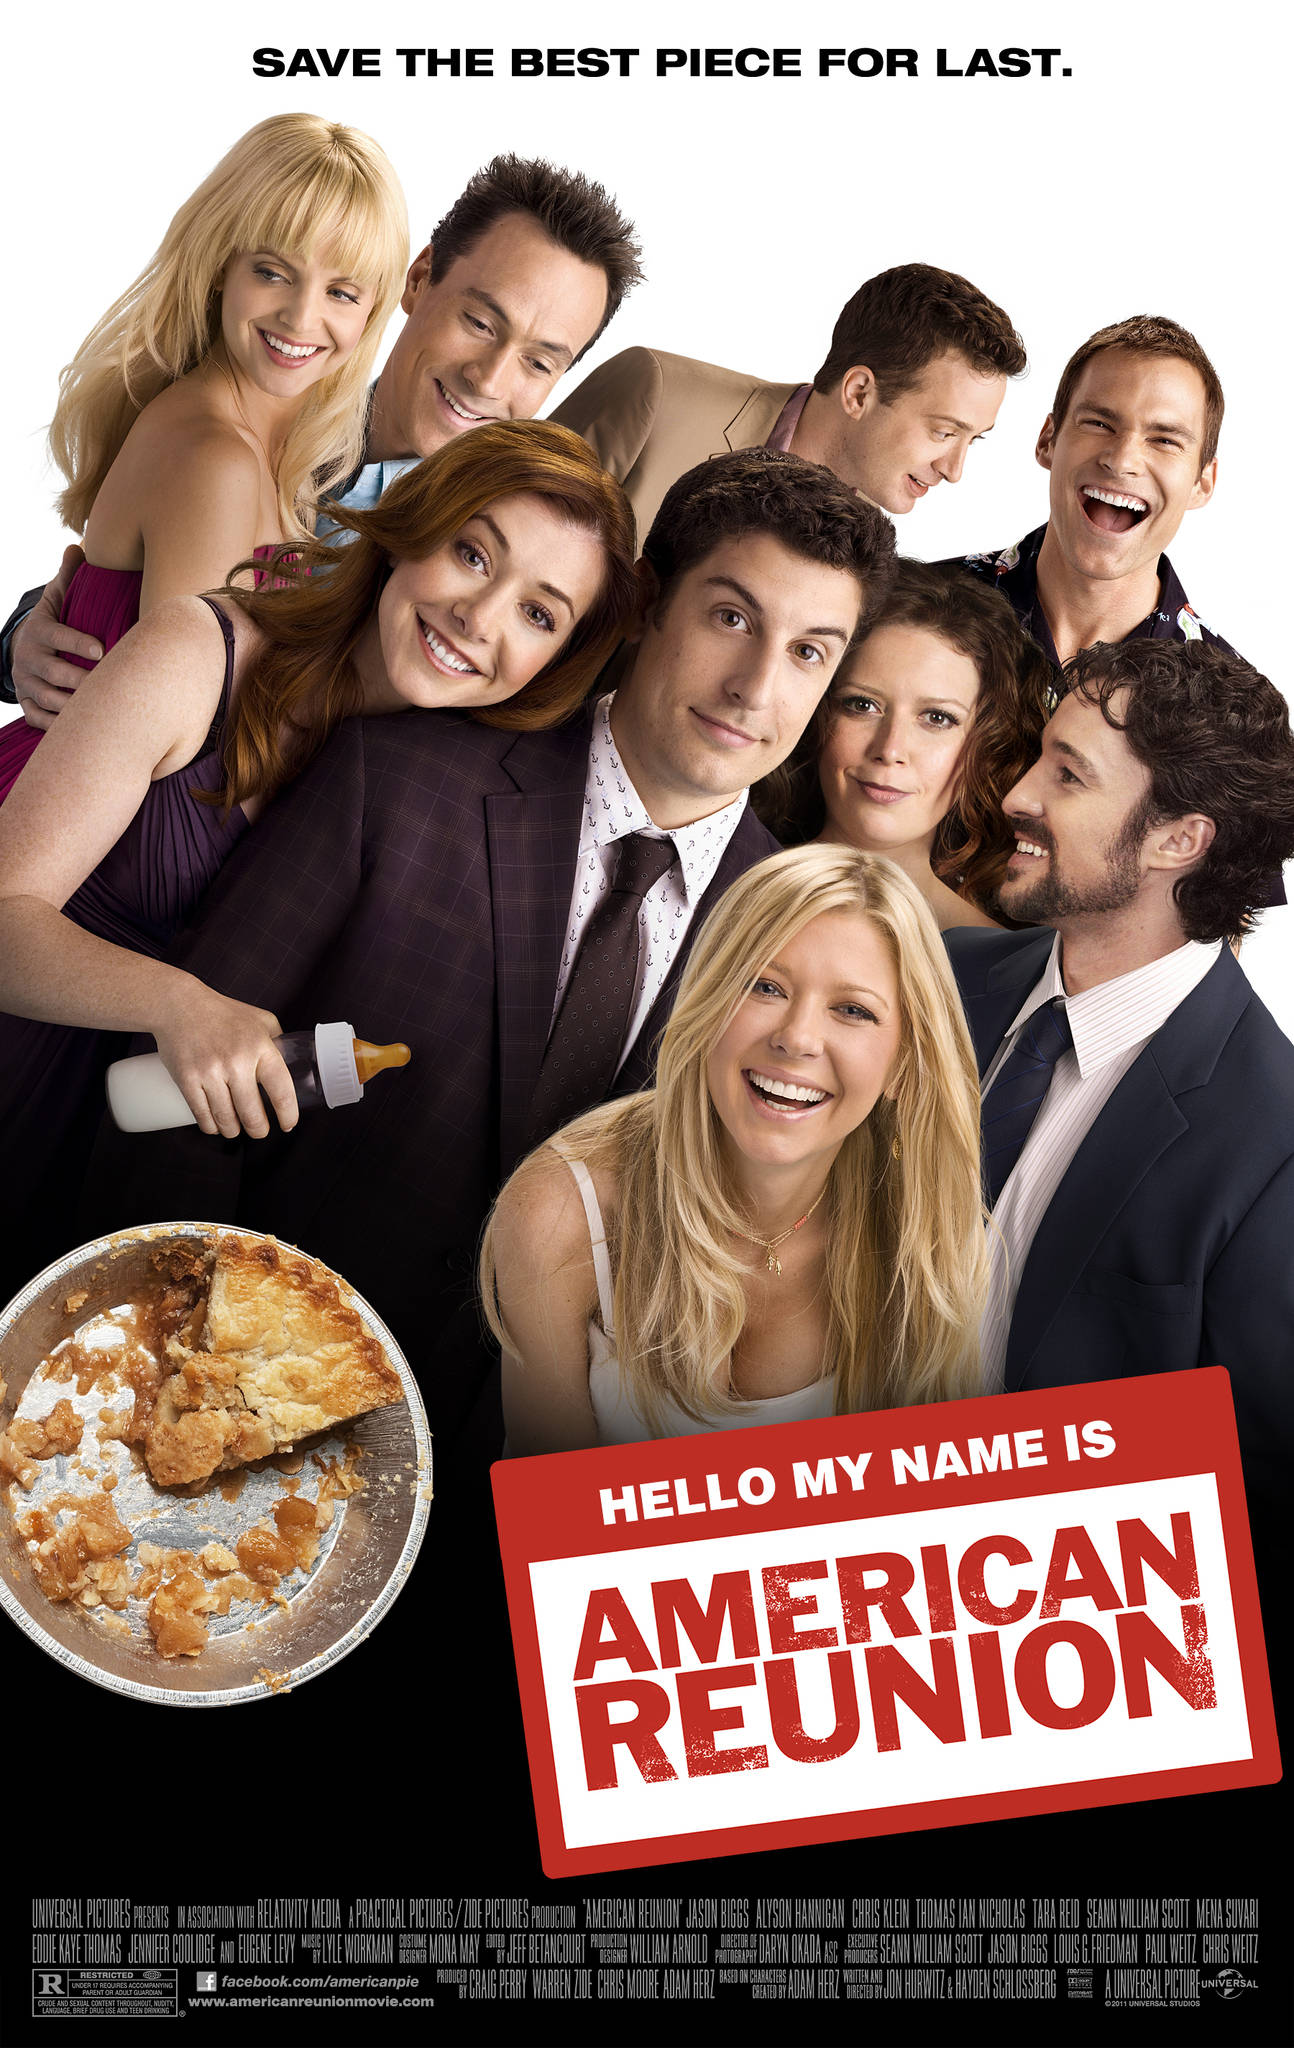 American Reunion Available on Blu-ray/DVD July 10th